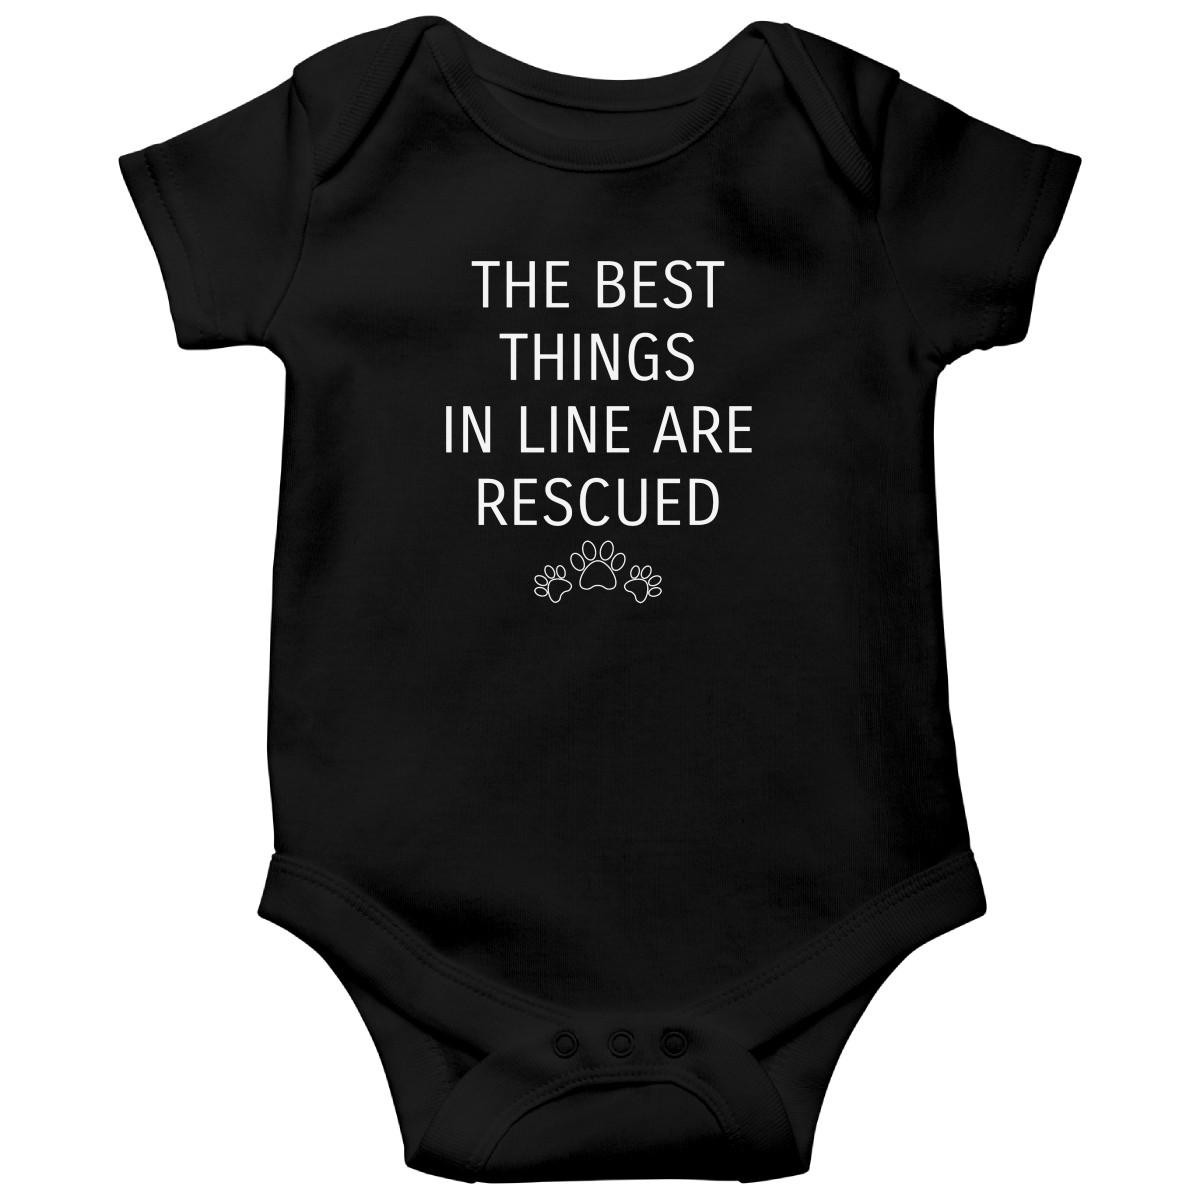 The Best Things In Life Are Rescued Baby Bodysuits | Black